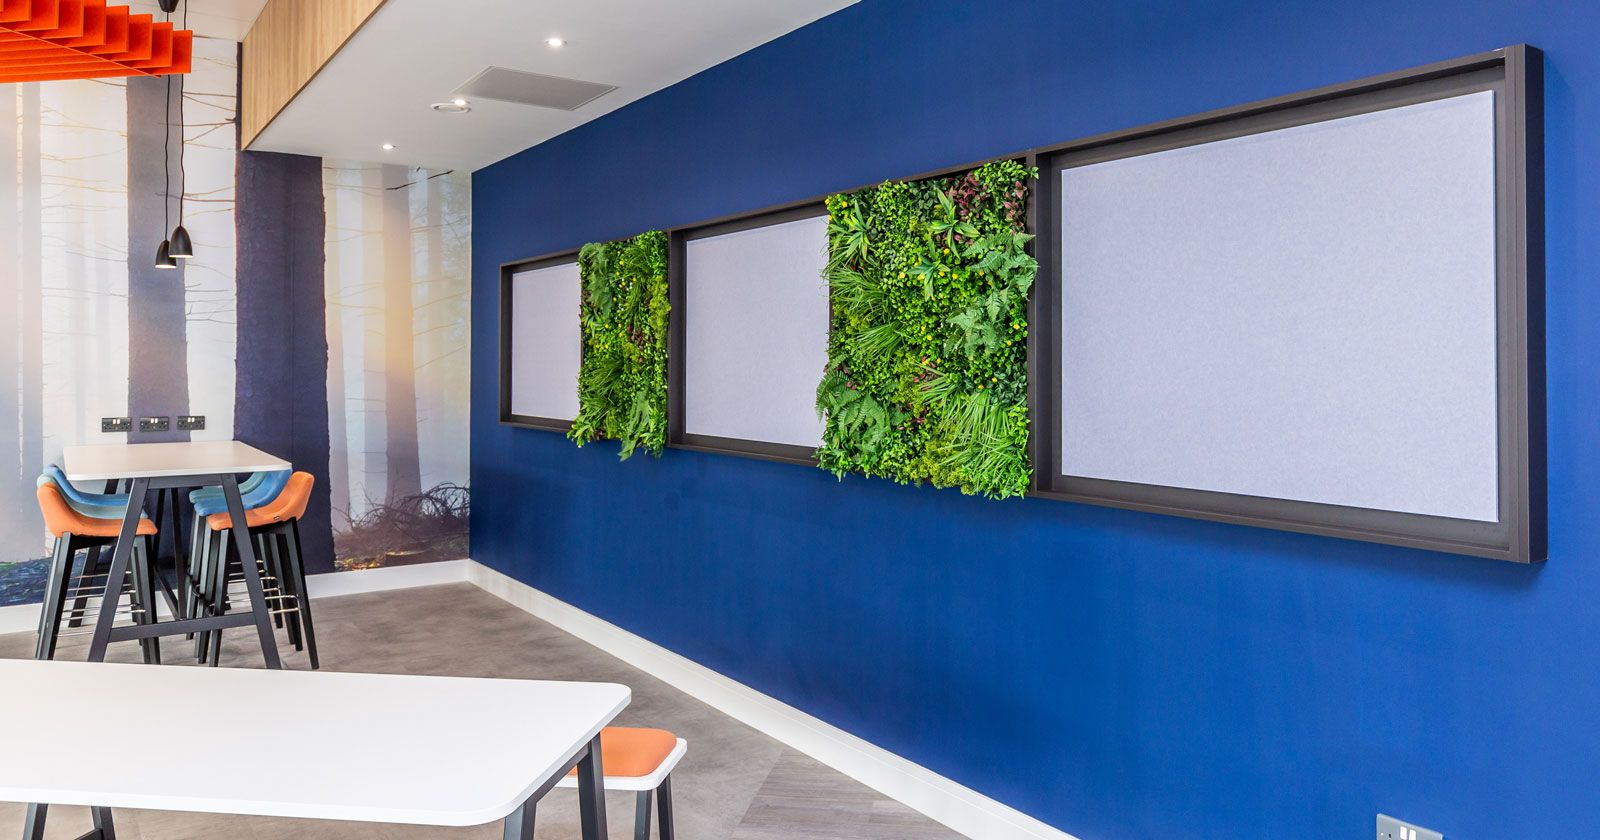 Canteen notice board area with greenery for biophilic feel